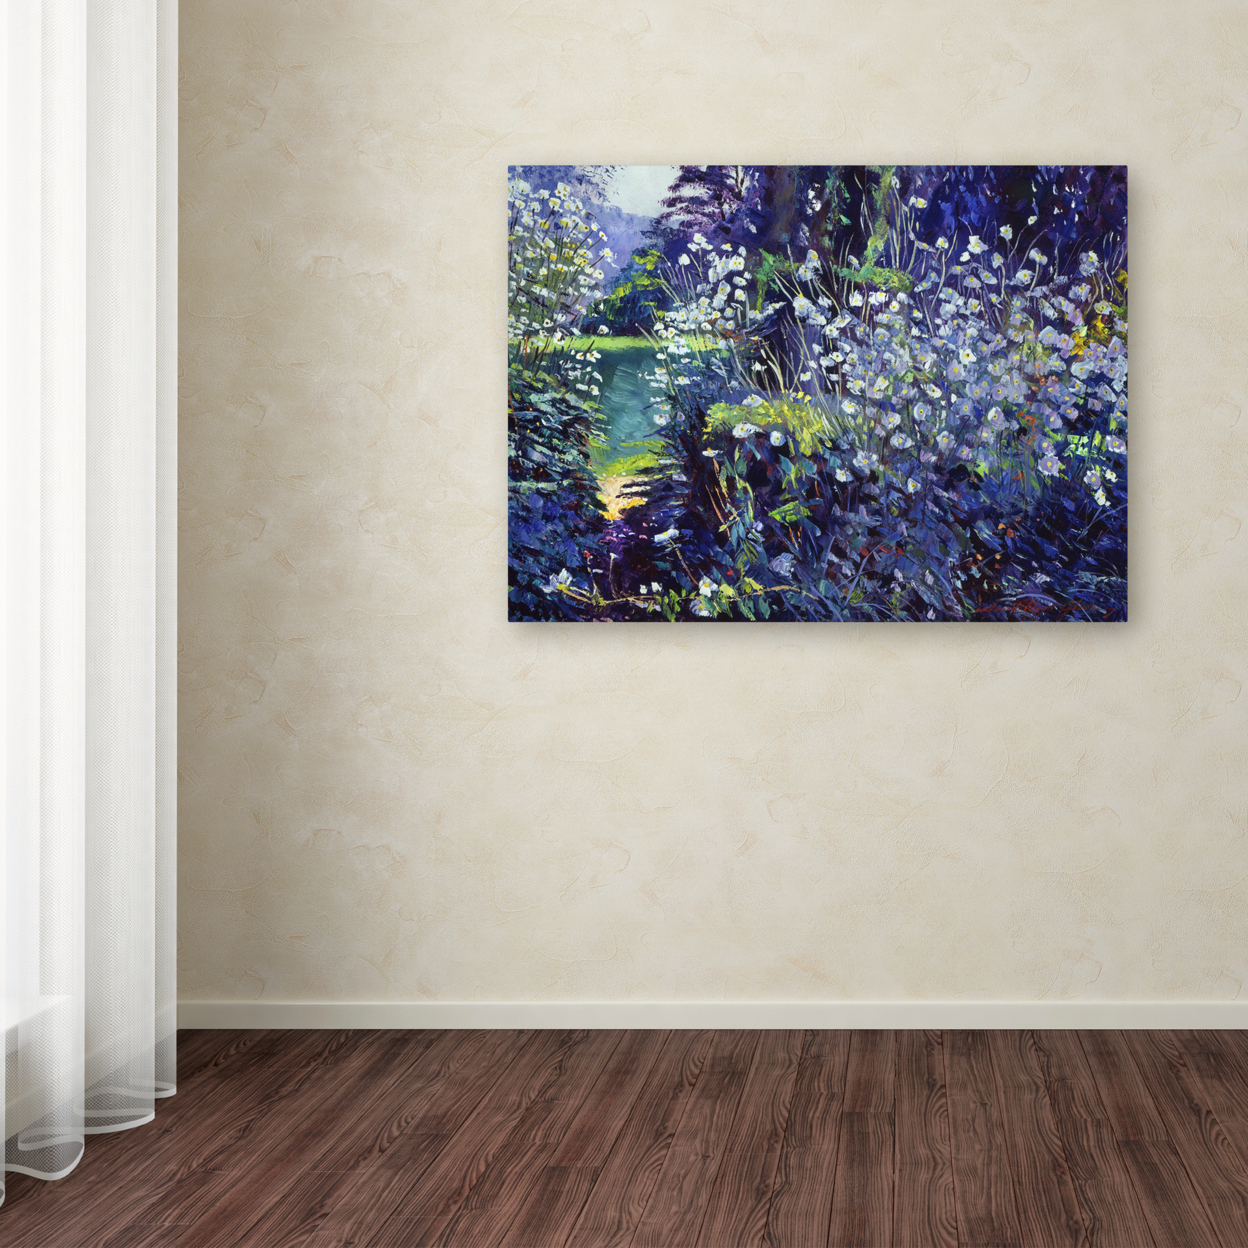 David Lloyd Glover 'Tangled White Flowers' Canvas Wall Art 35 X 47 Inches